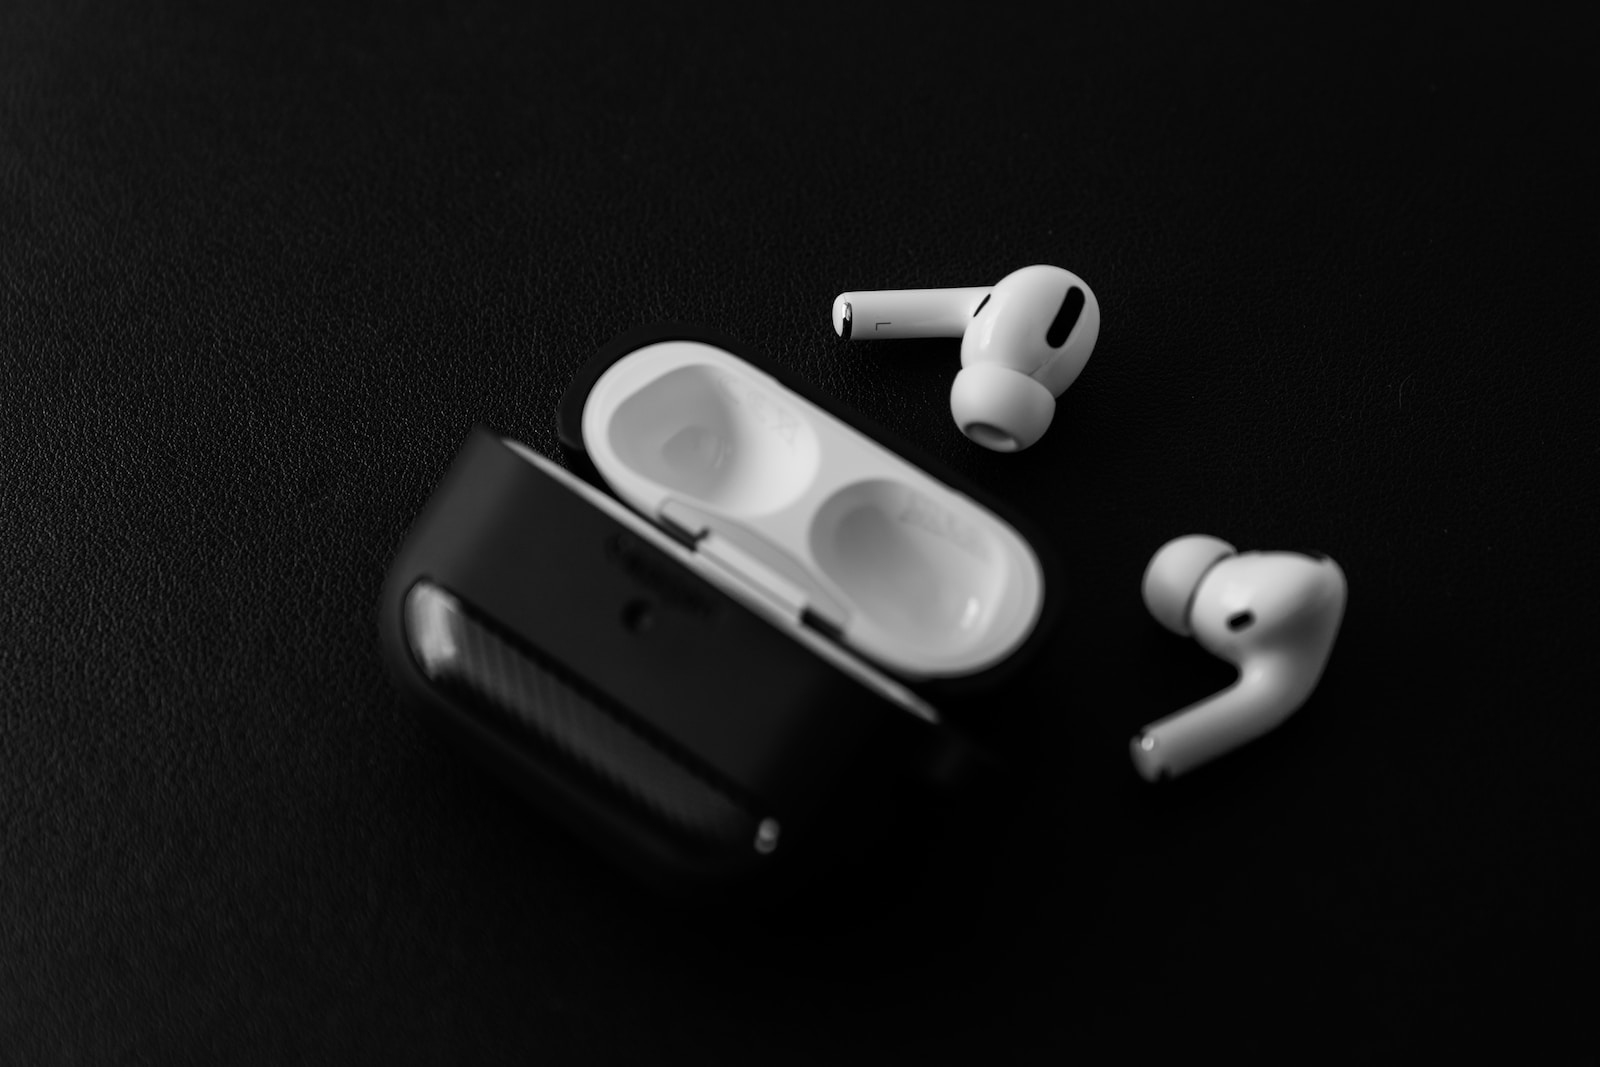 Why are airpods not going into pairing mode?